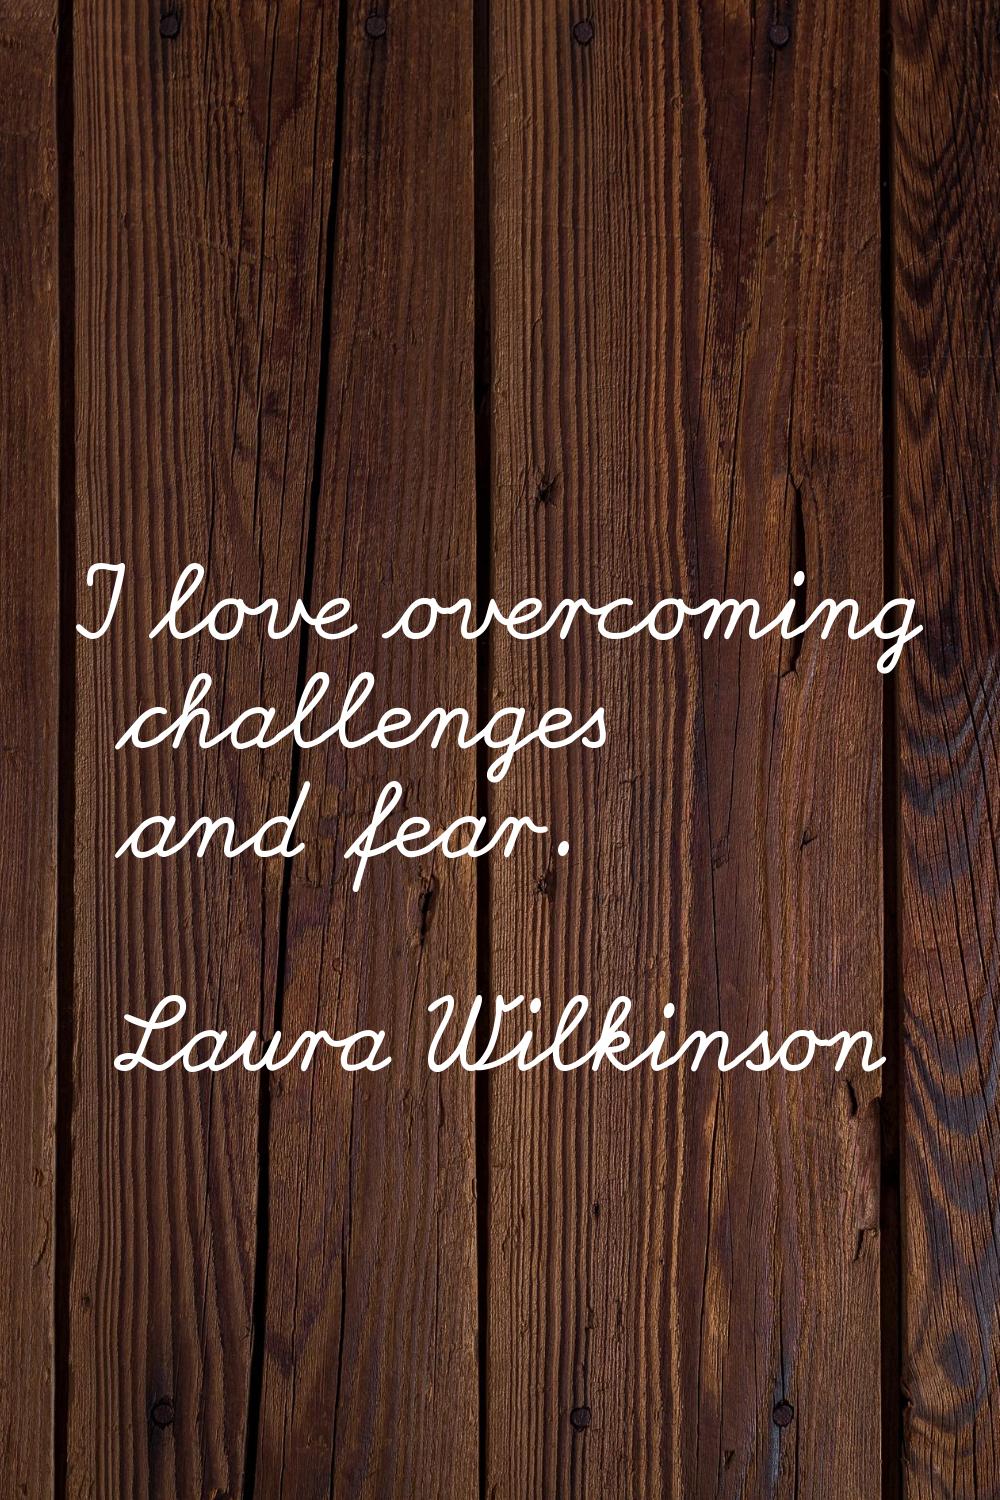 I love overcoming challenges and fear.